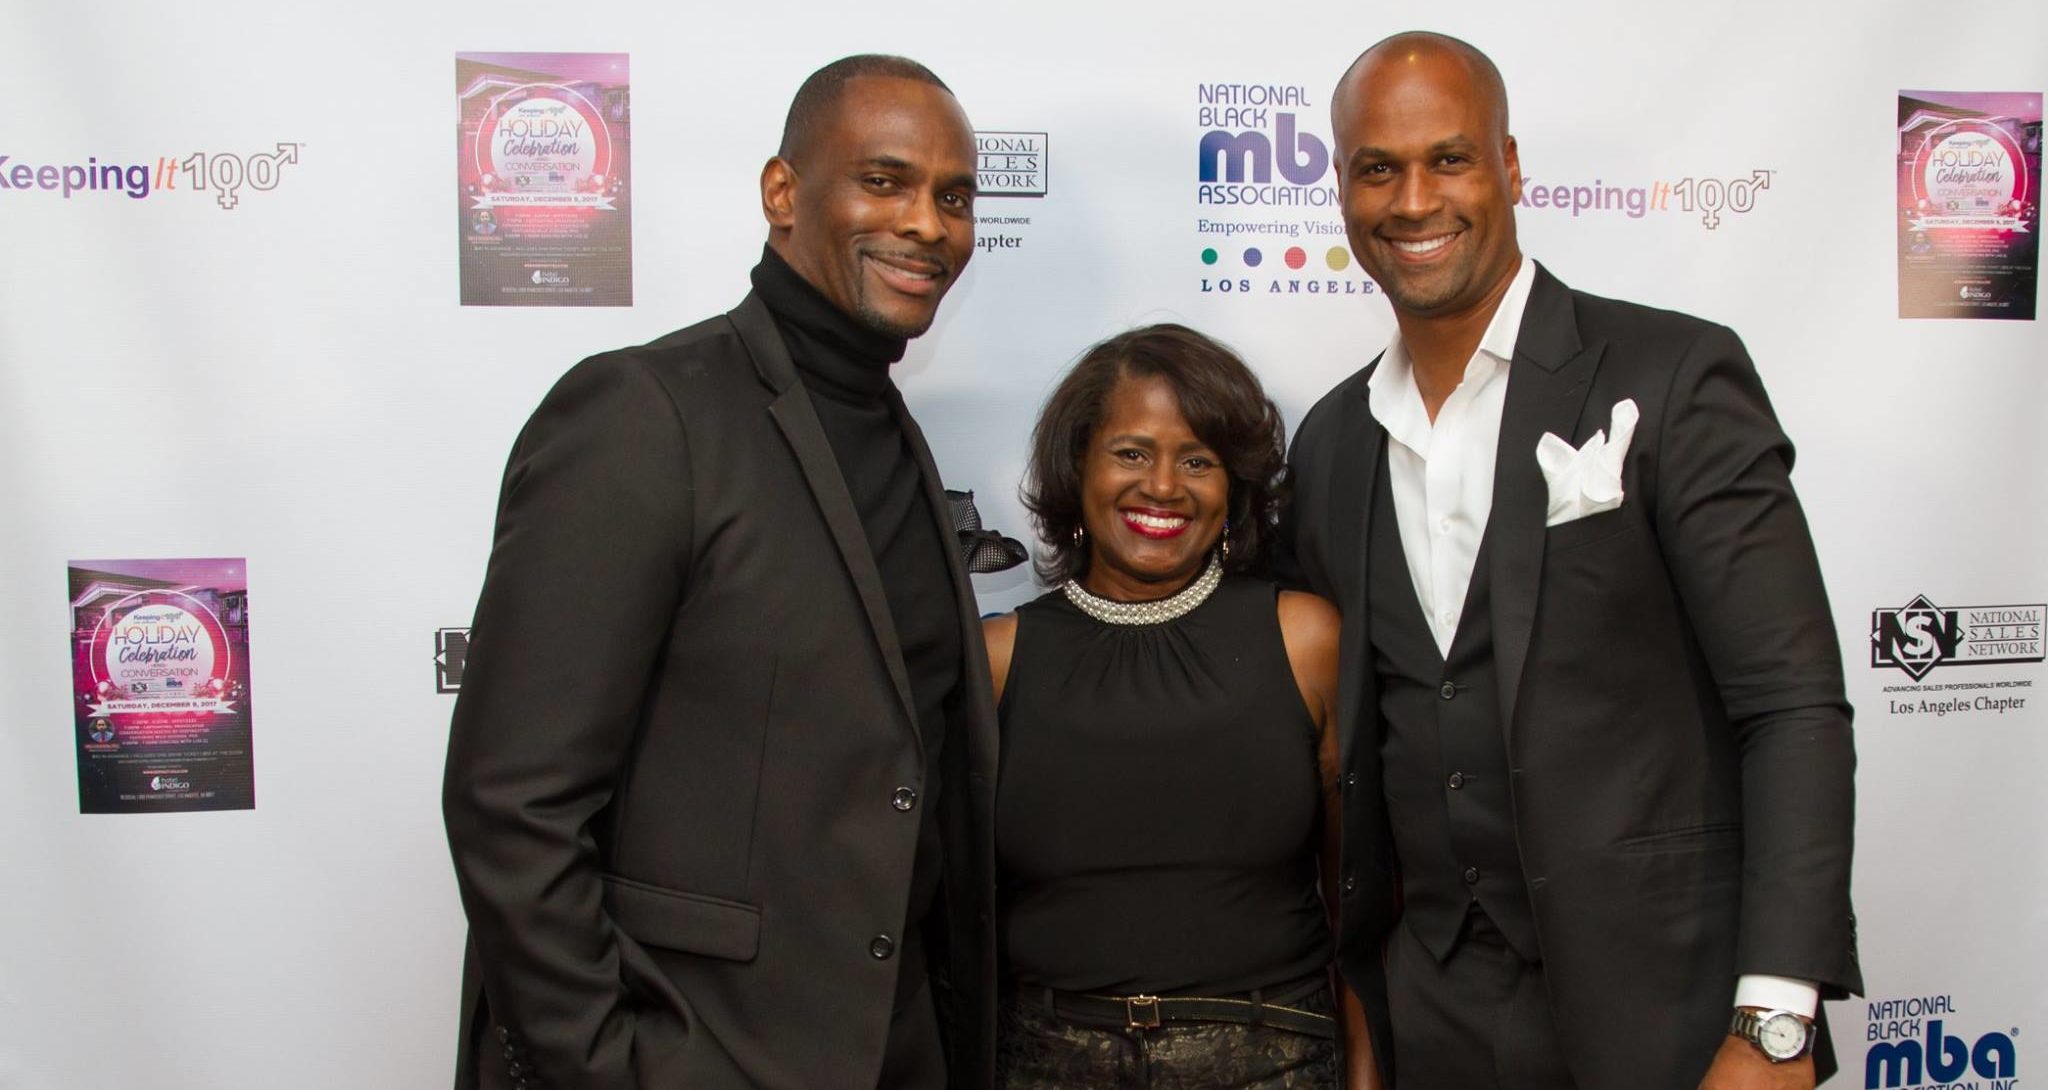 (Pictured from left to right: Marvin Lawton, Host; Lynn Beatty, Host; Kerry Neal, Founder, KeepingIt100LA)